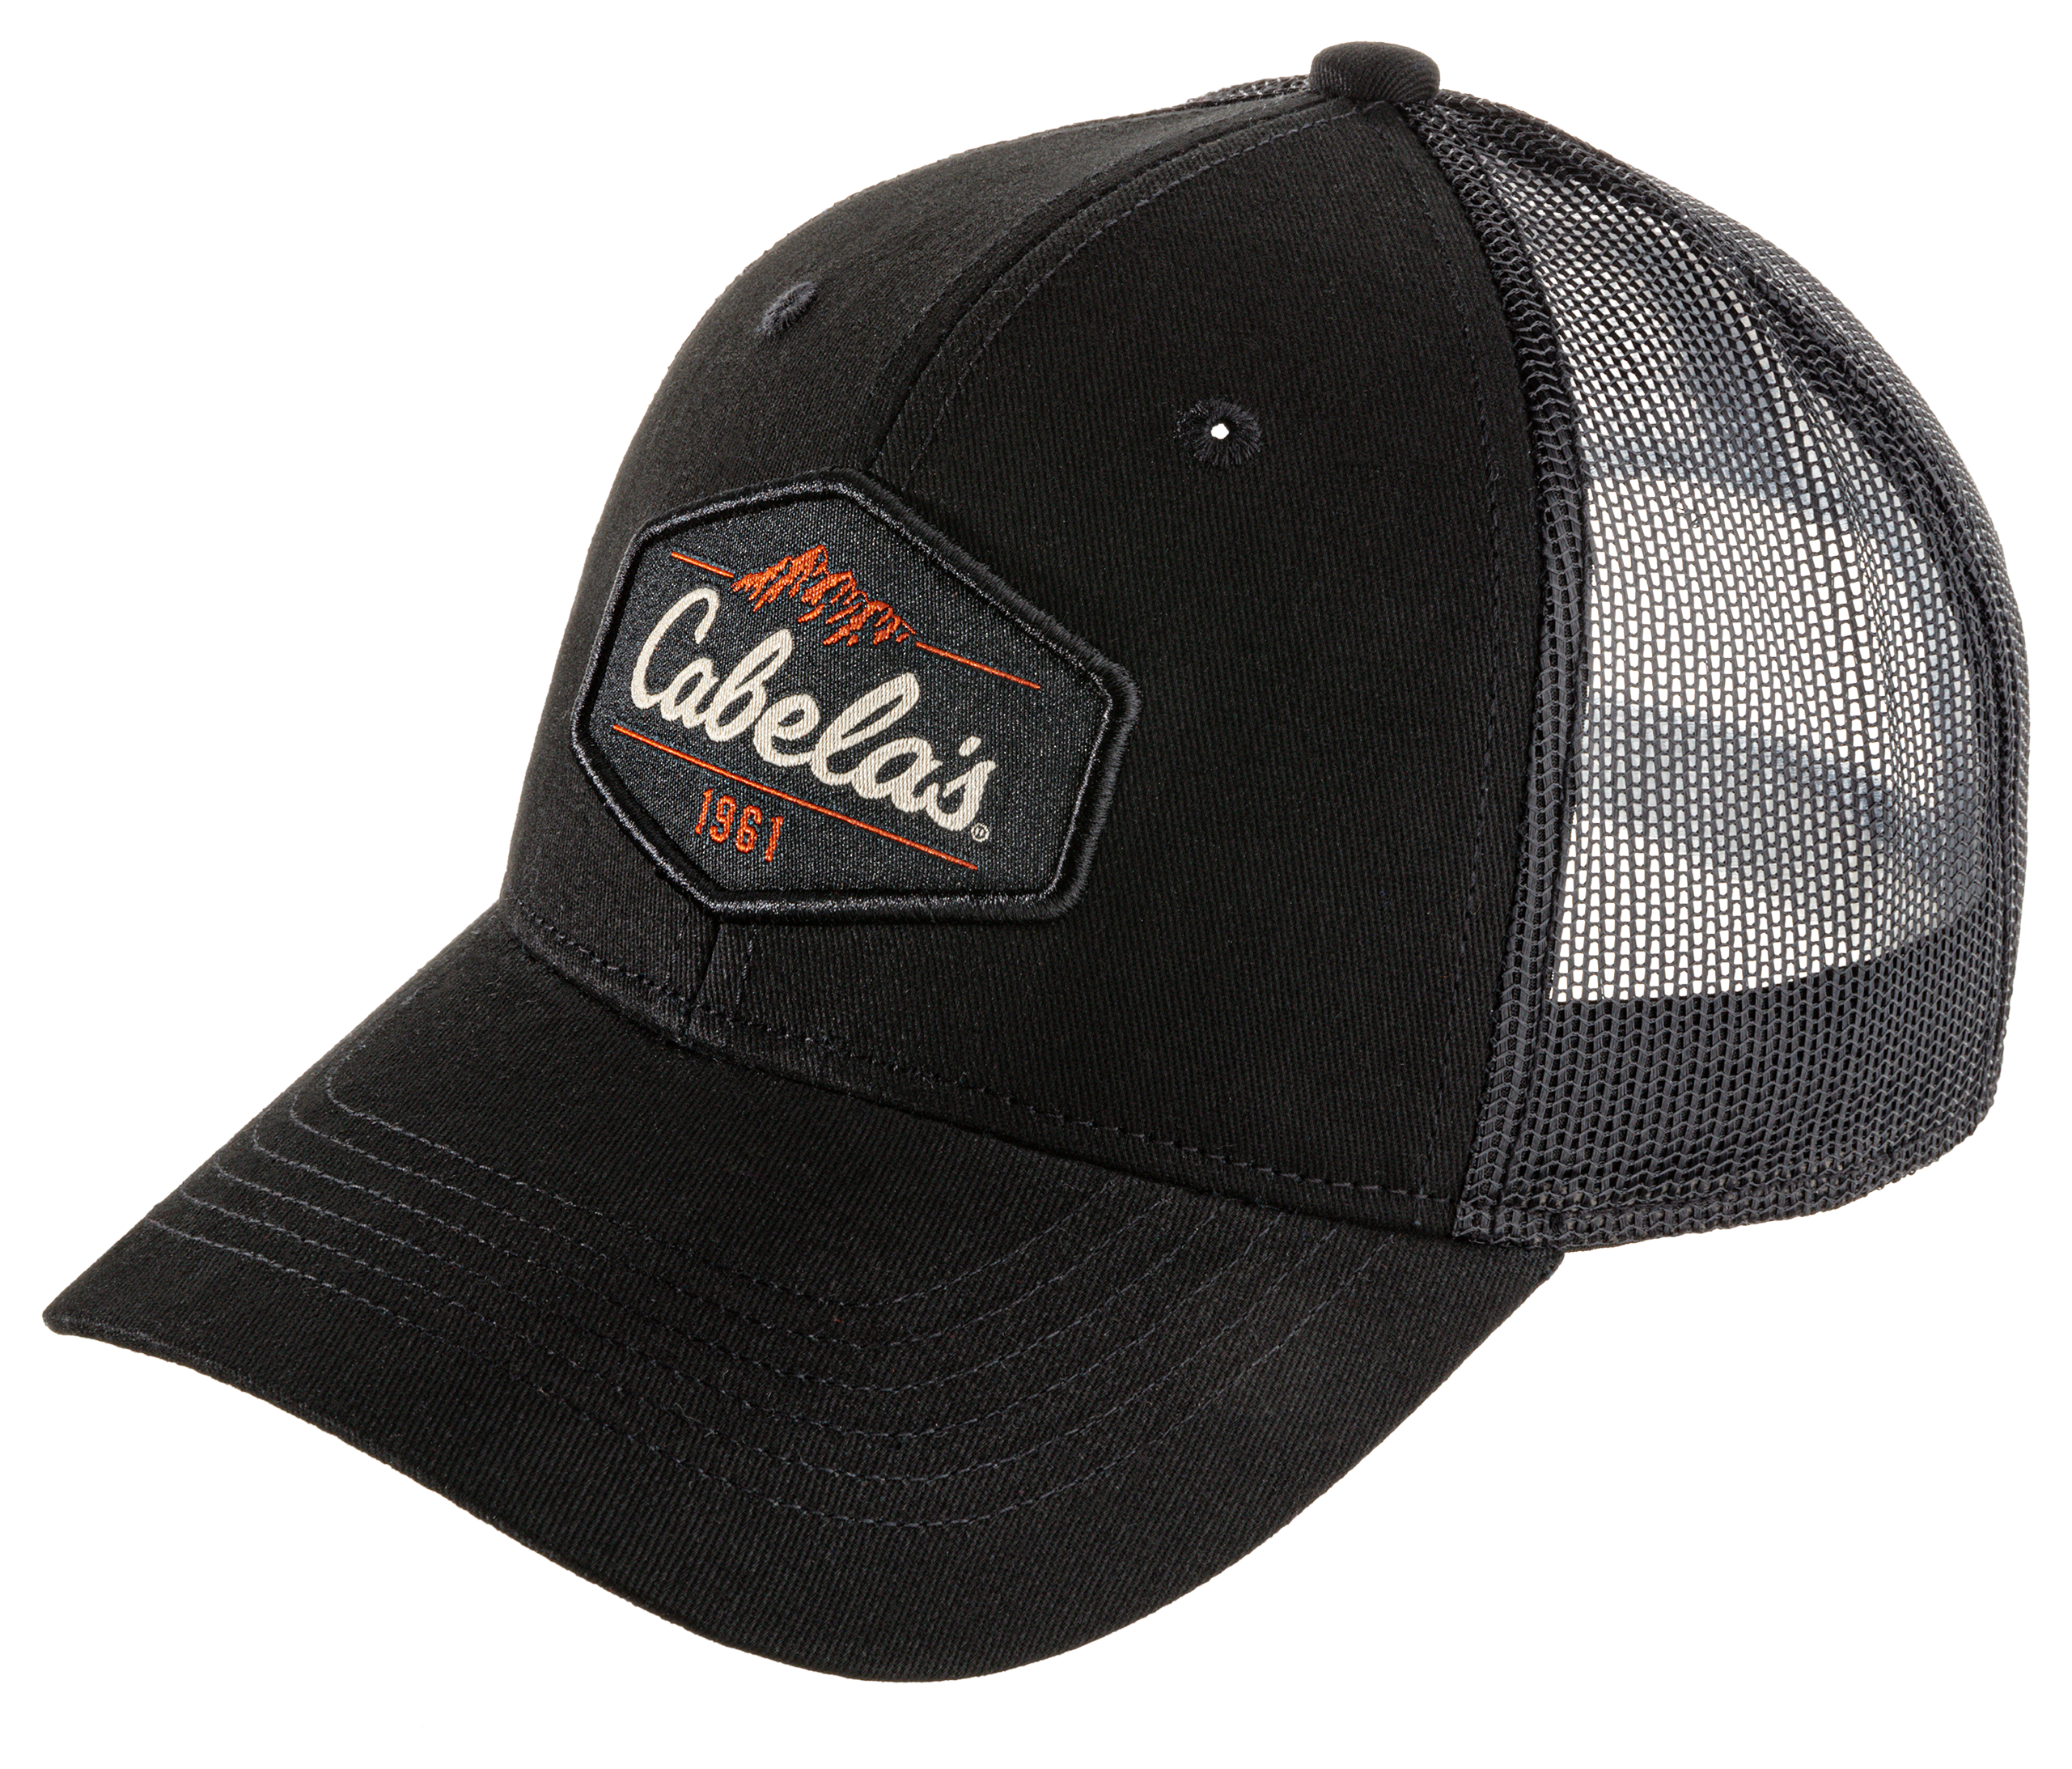 Cabelas Logo Trucker Hat Black And Beige Mesh Snap Back One Size Fits Most